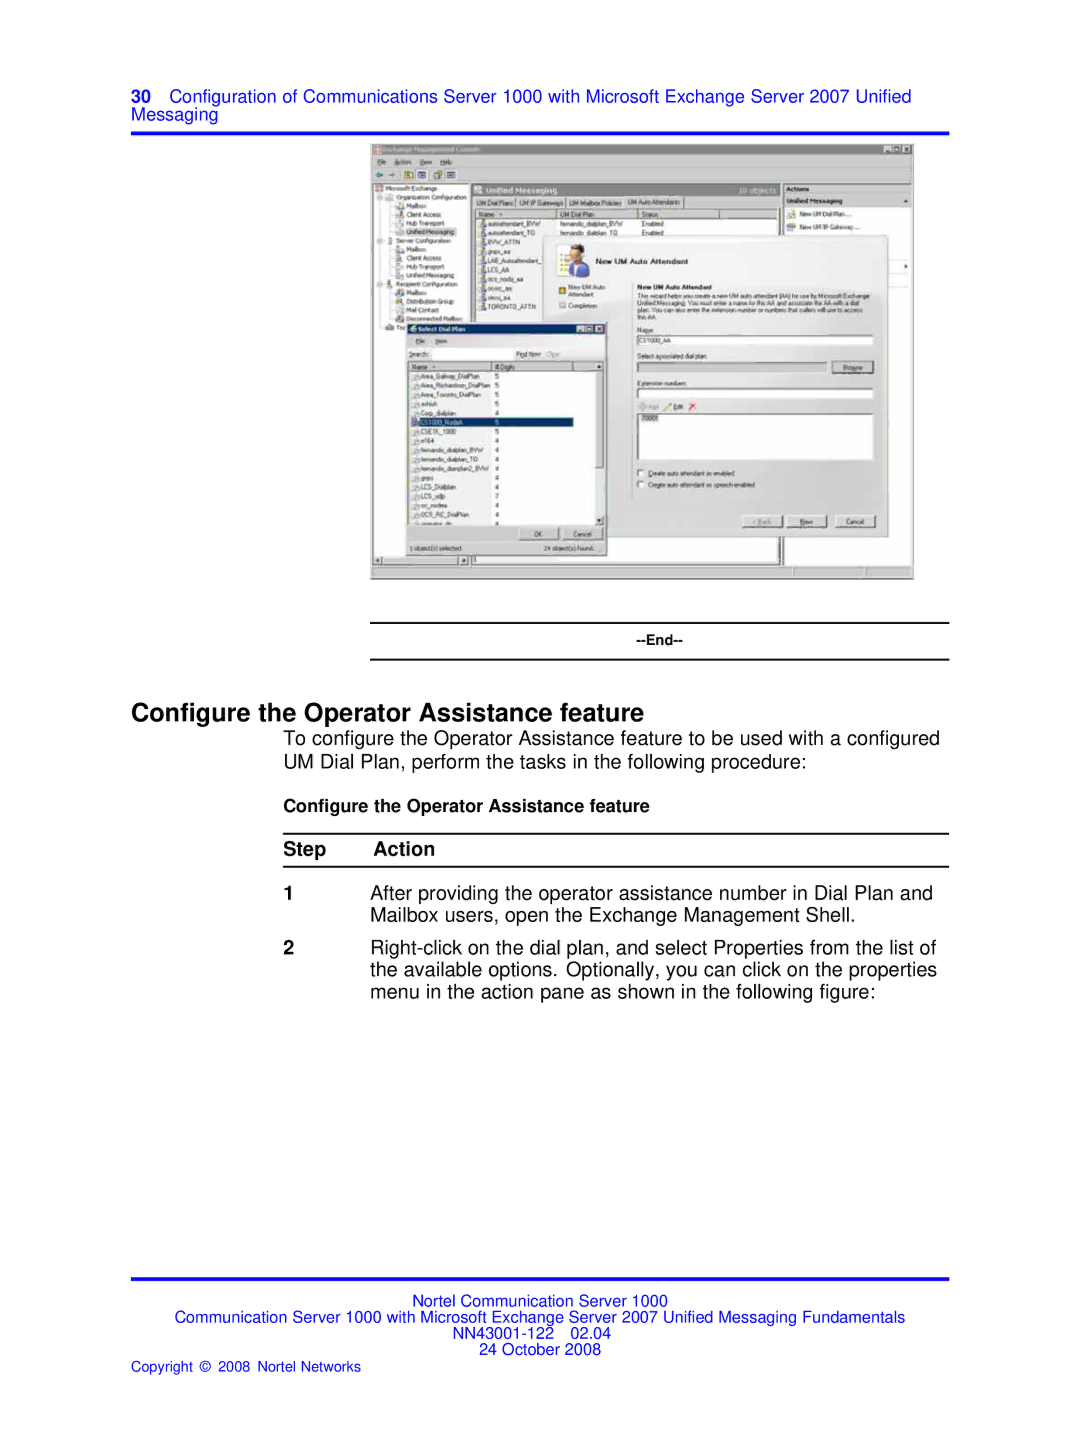 Nortel Networks NN43001-122 manual Conﬁgure the Operator Assistance feature 